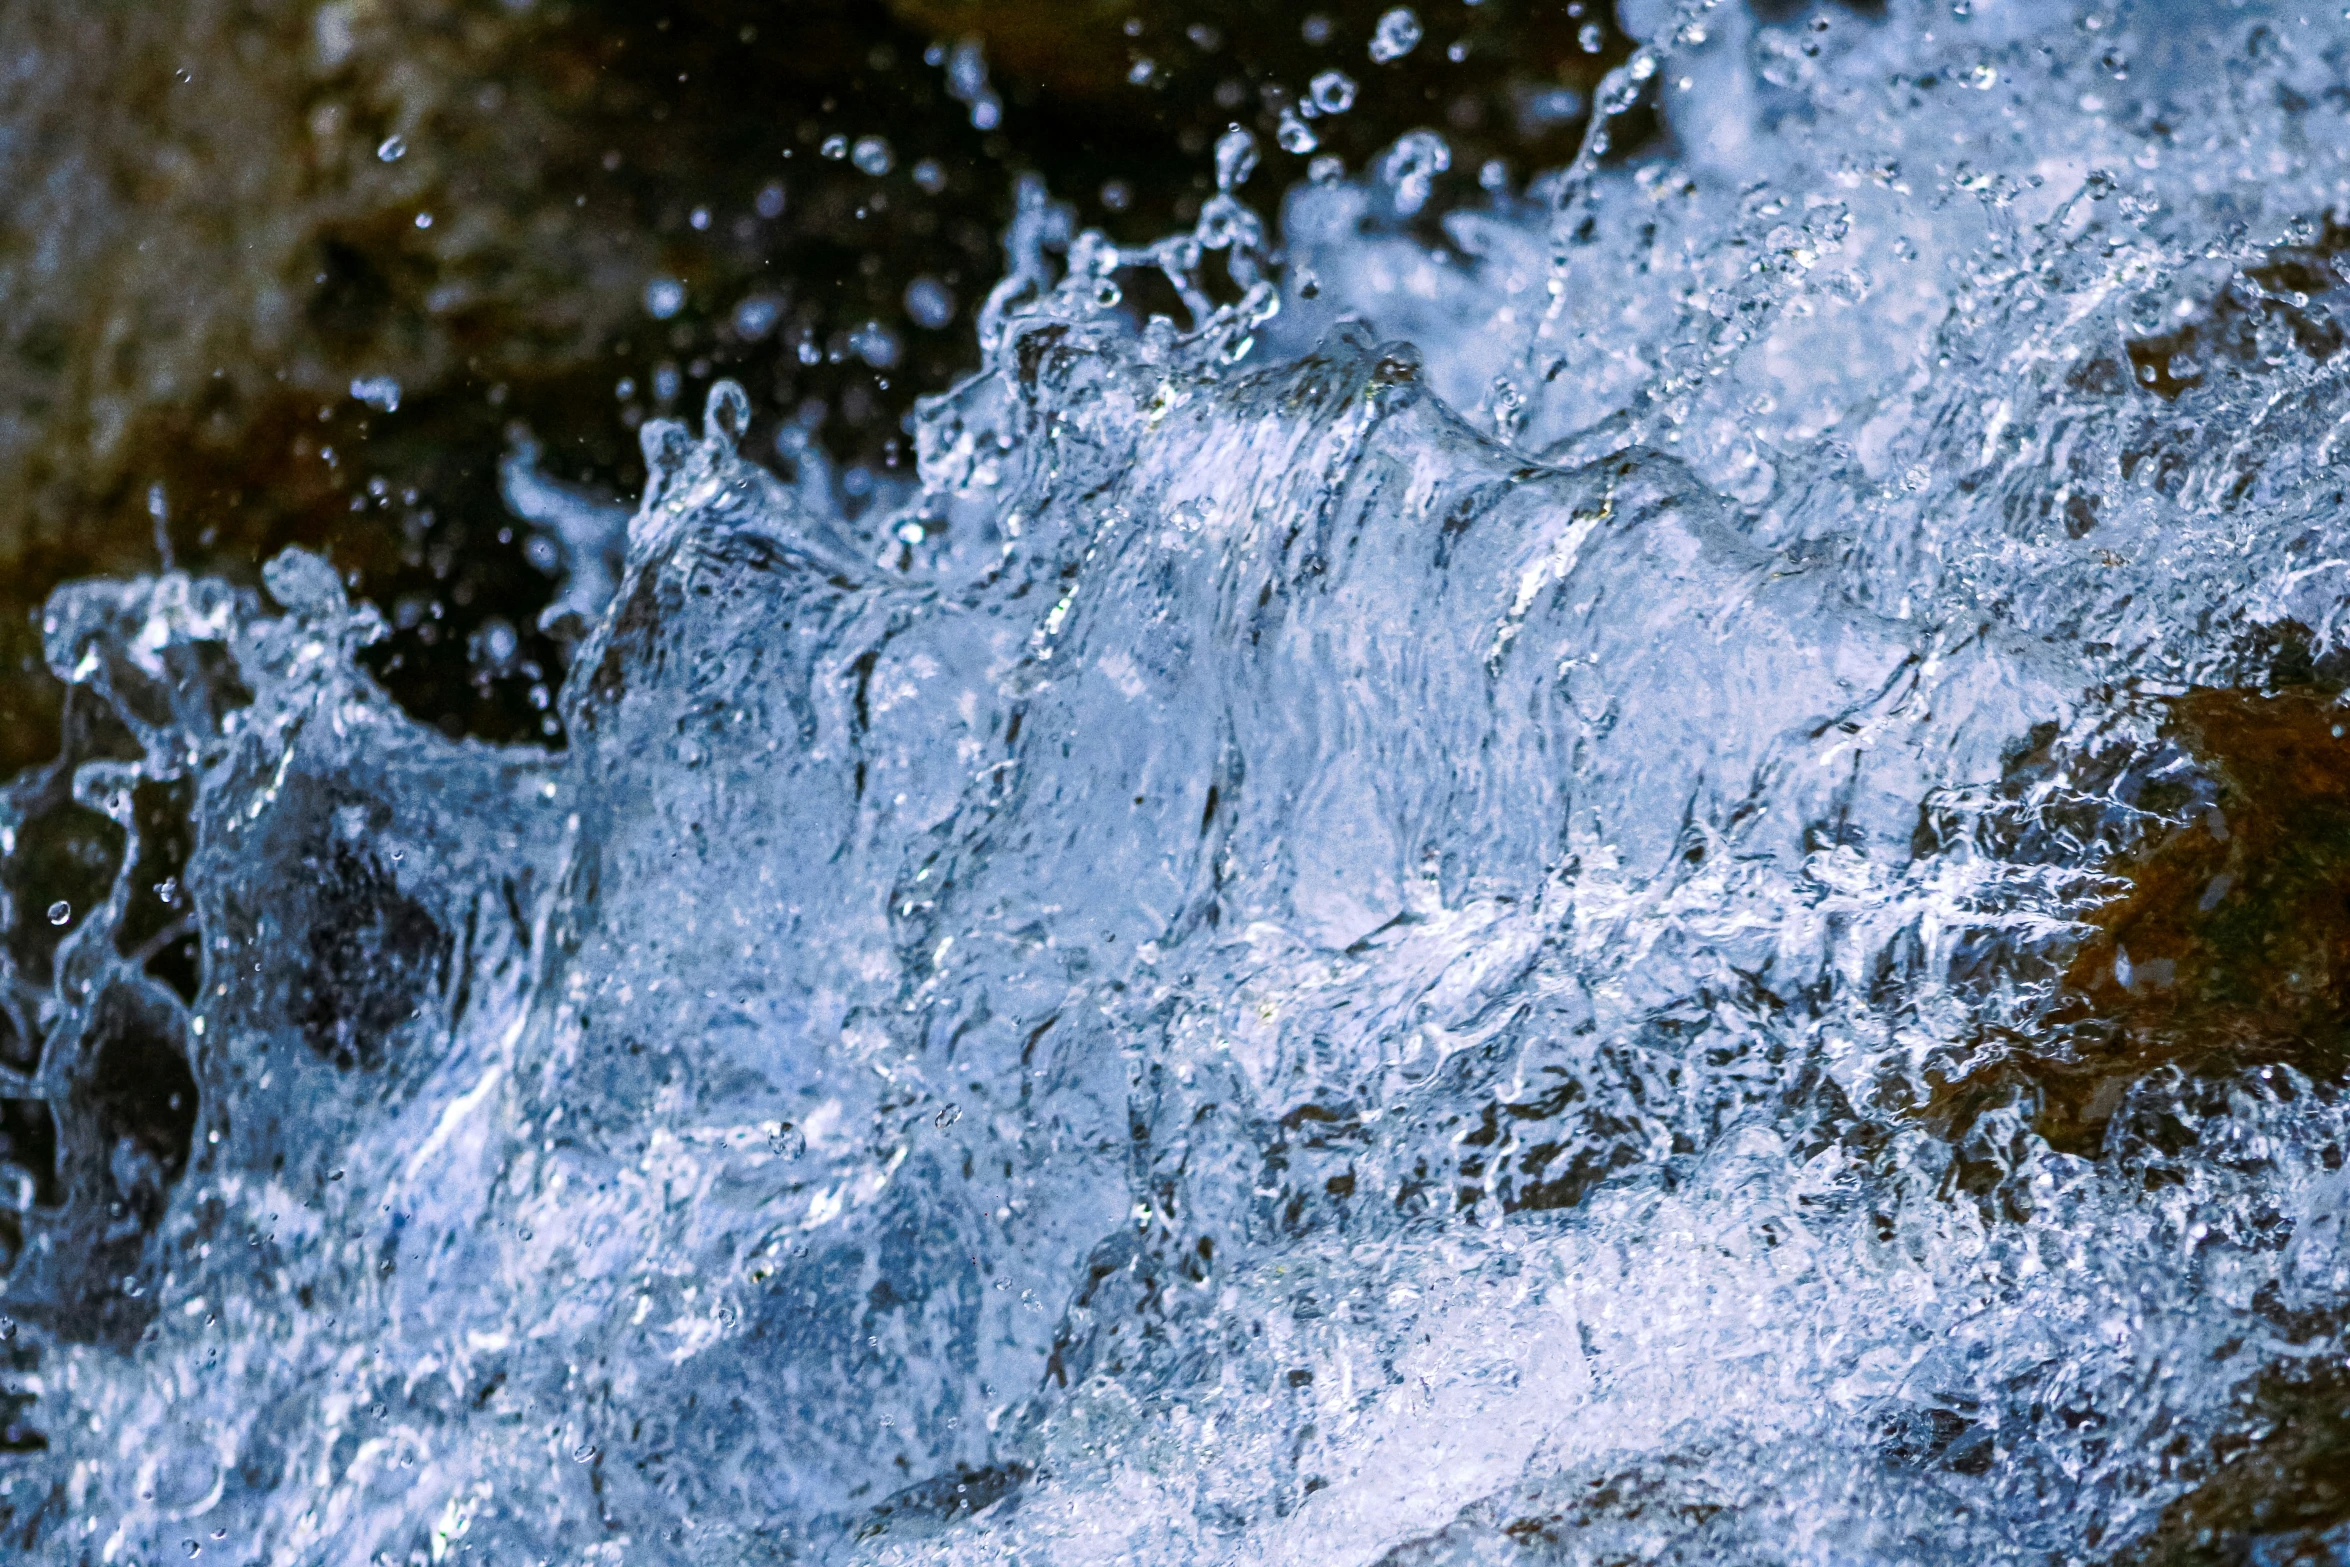 a close up view of a bunch of water shooting from the bottom